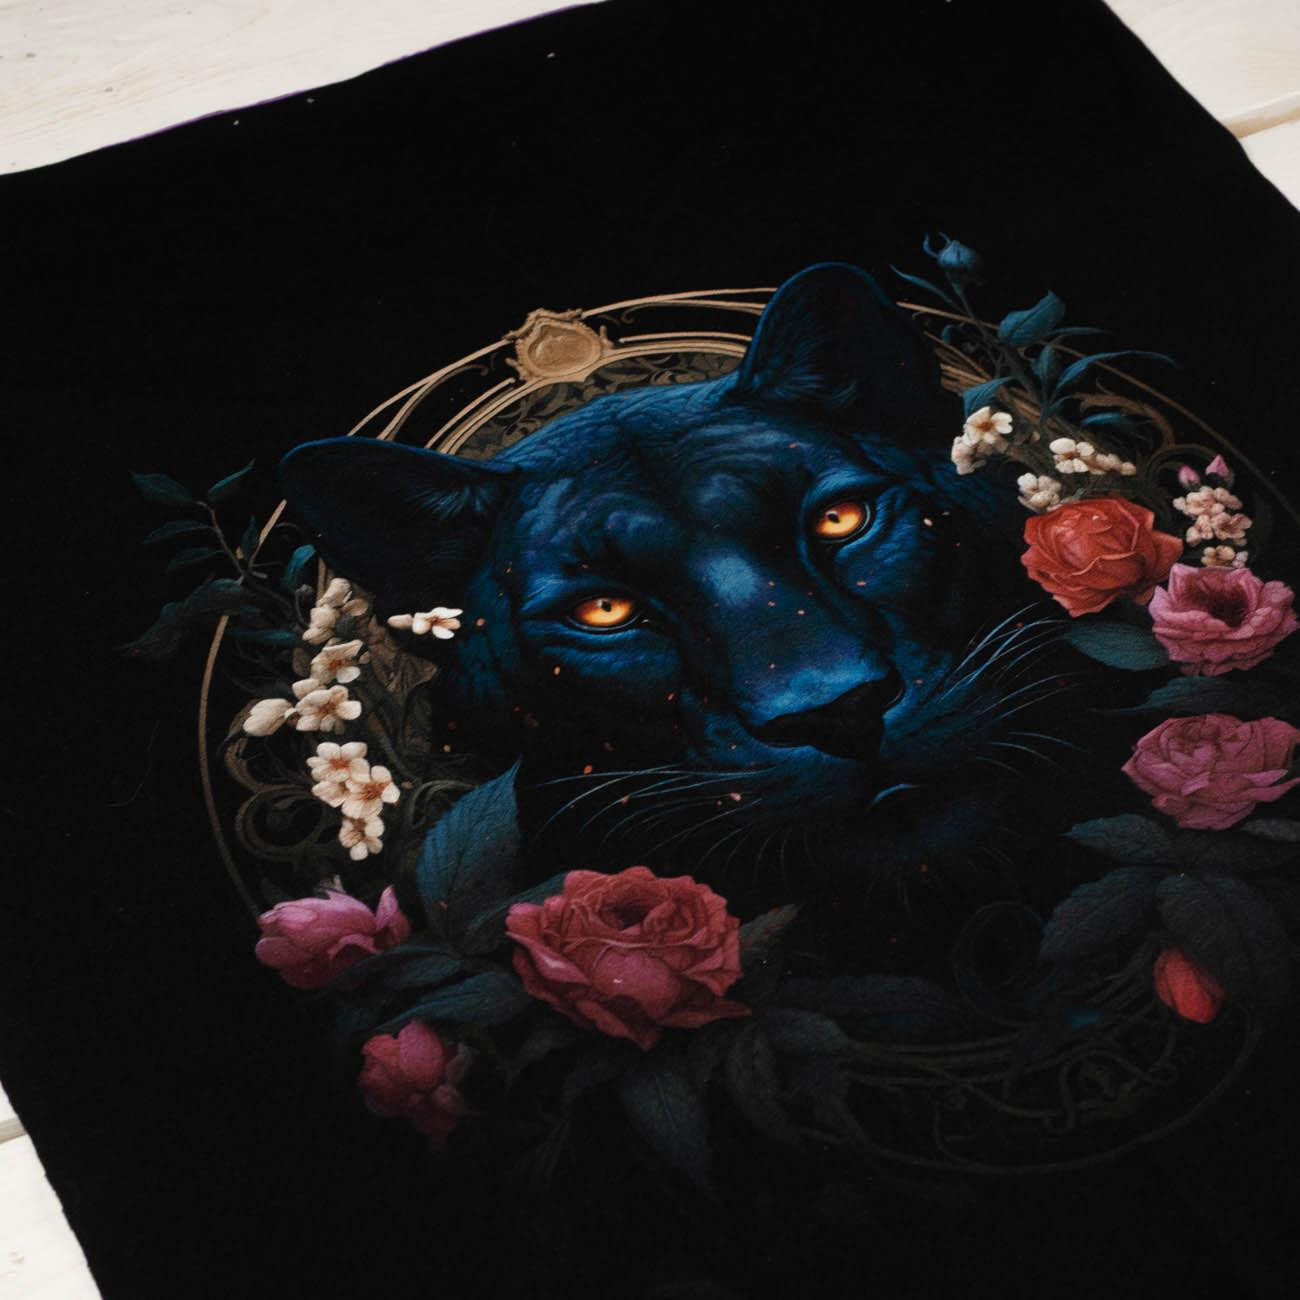 GOTHIC PANTHER - Paneel (60cm x 50cm) Sommersweat